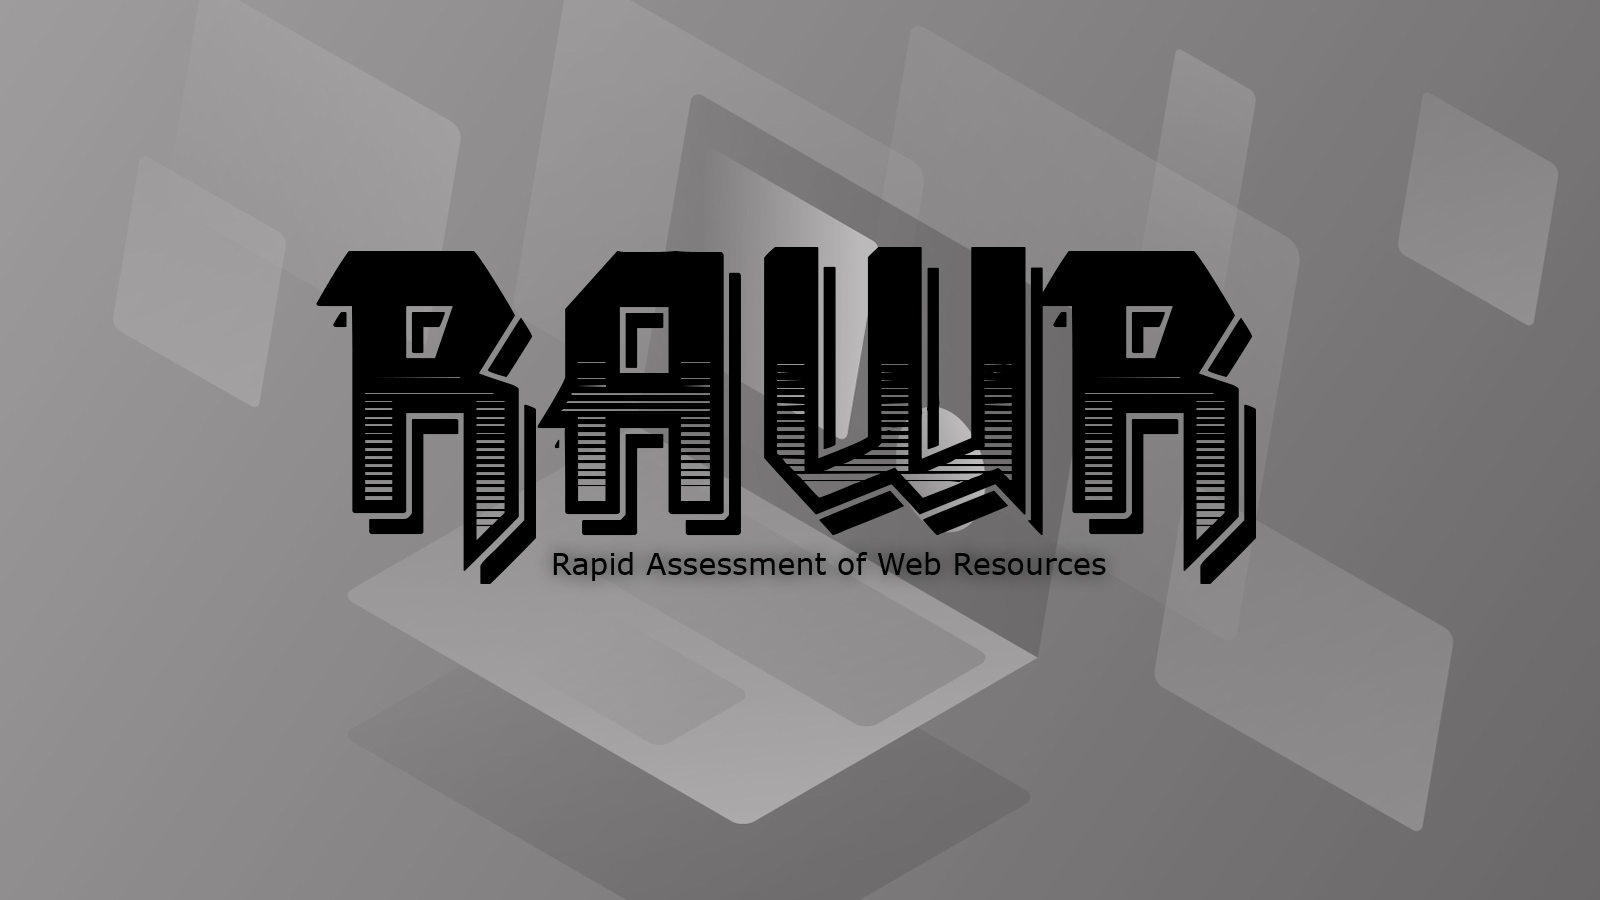 RAWR - Rapid Assessment of Web Resources